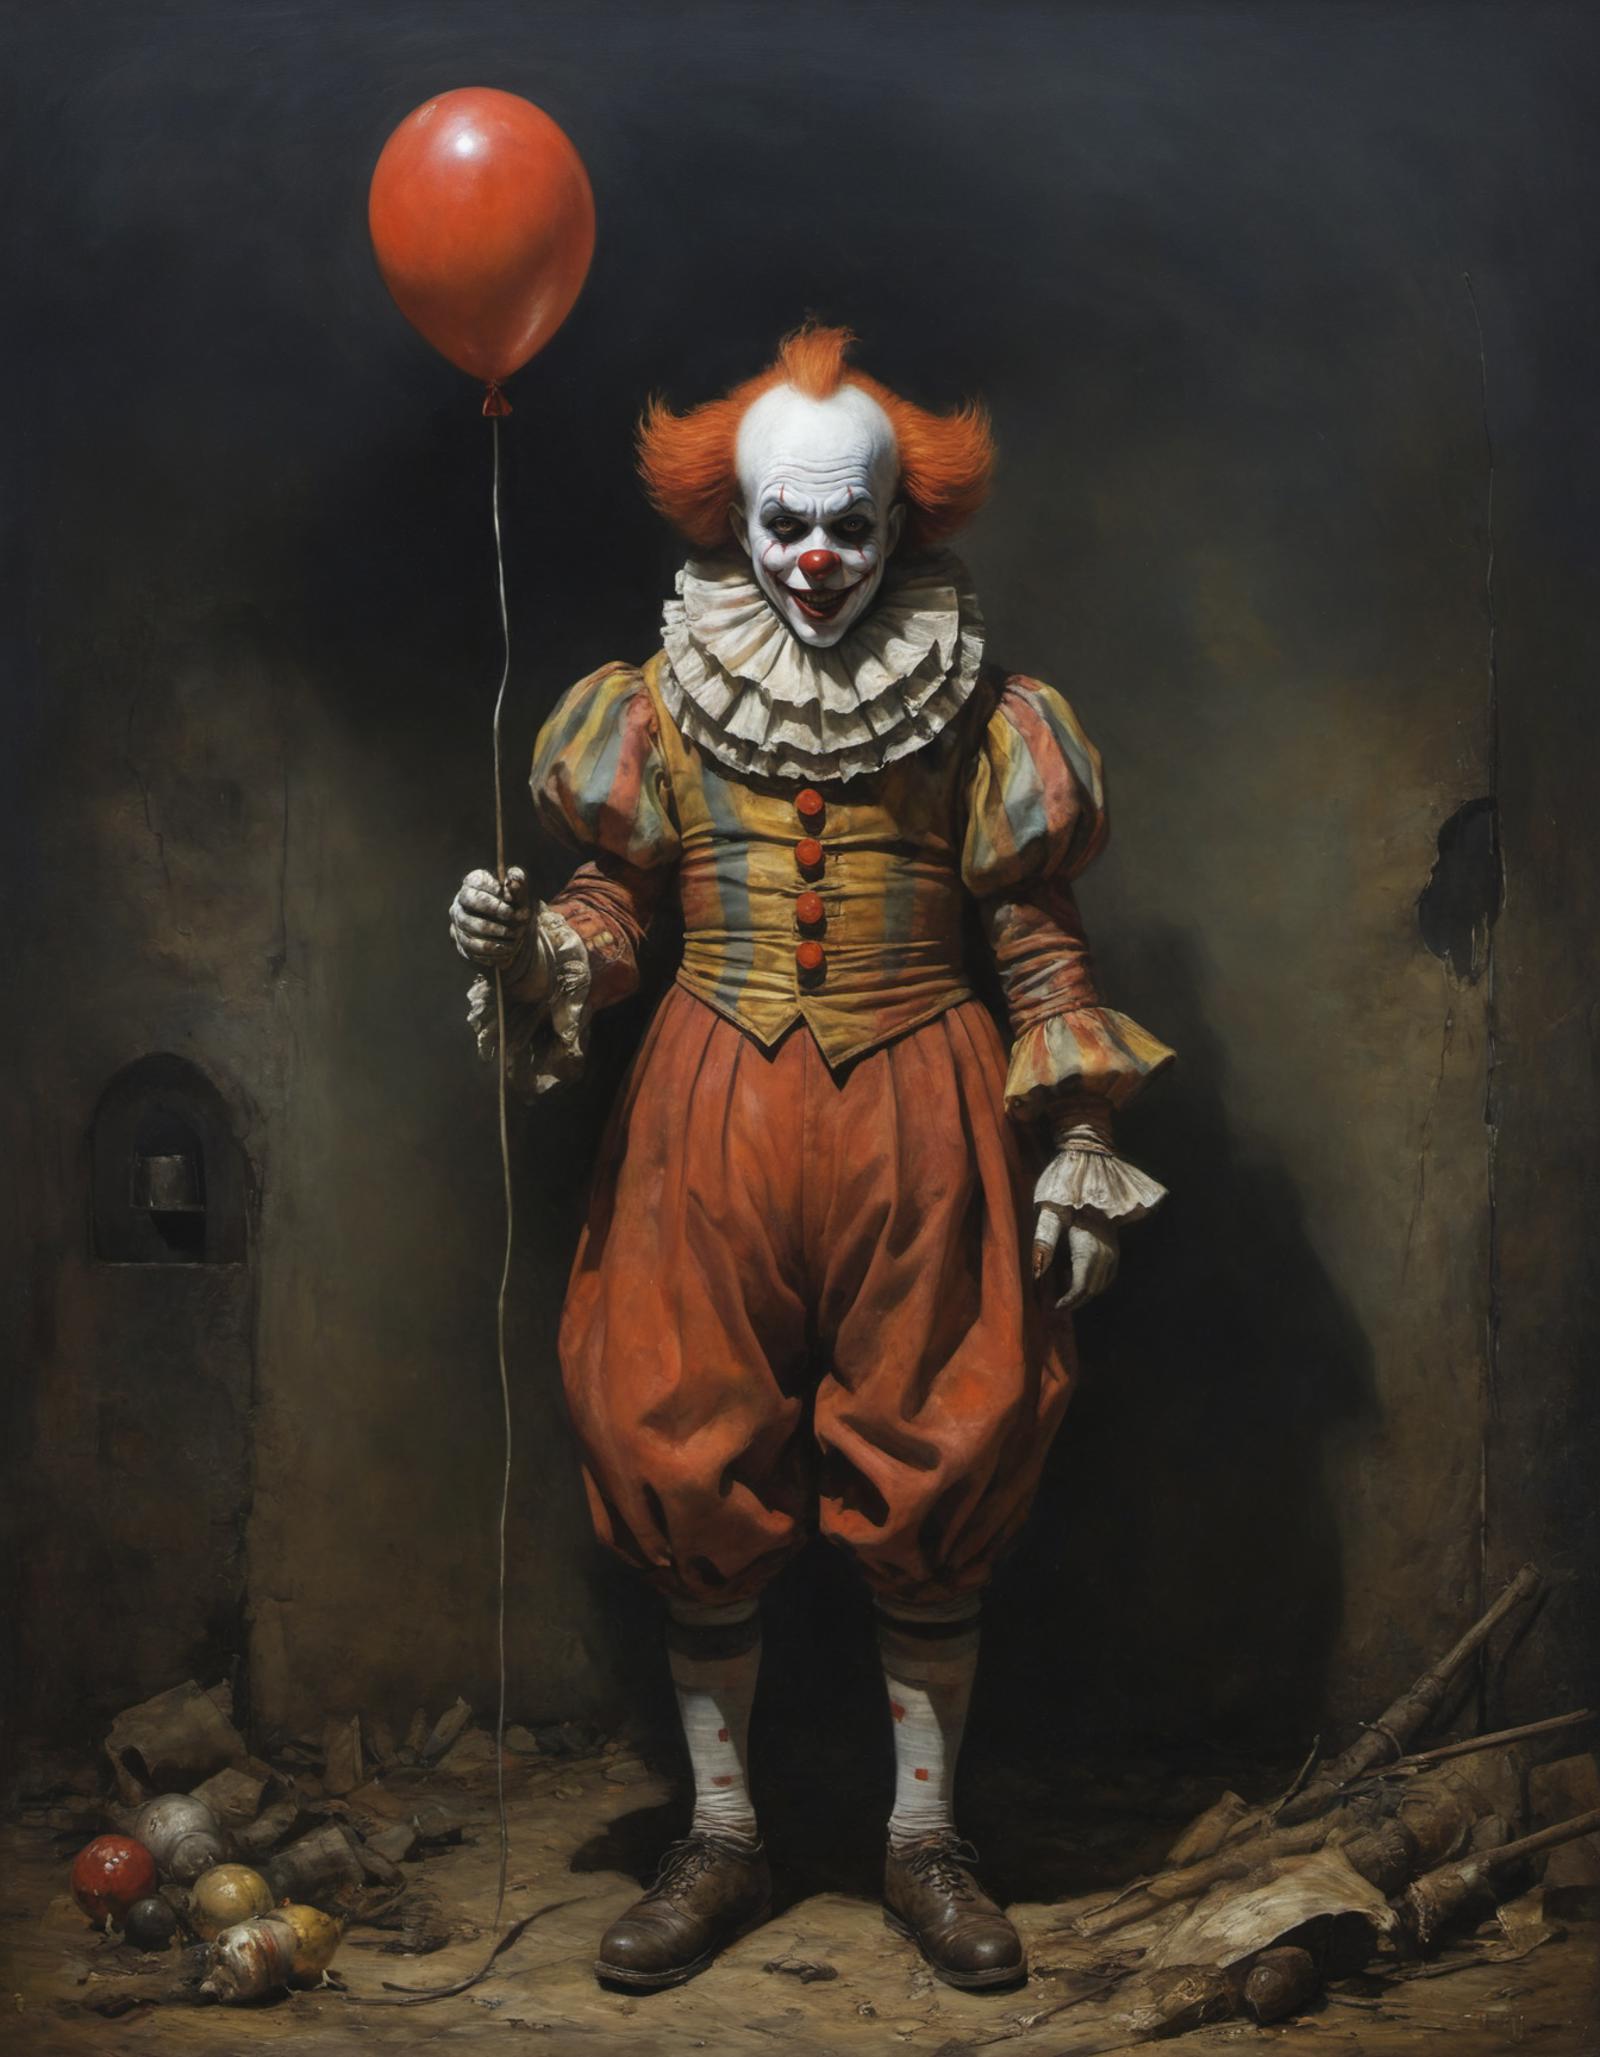 A dark painting of a clown holding a red balloon.